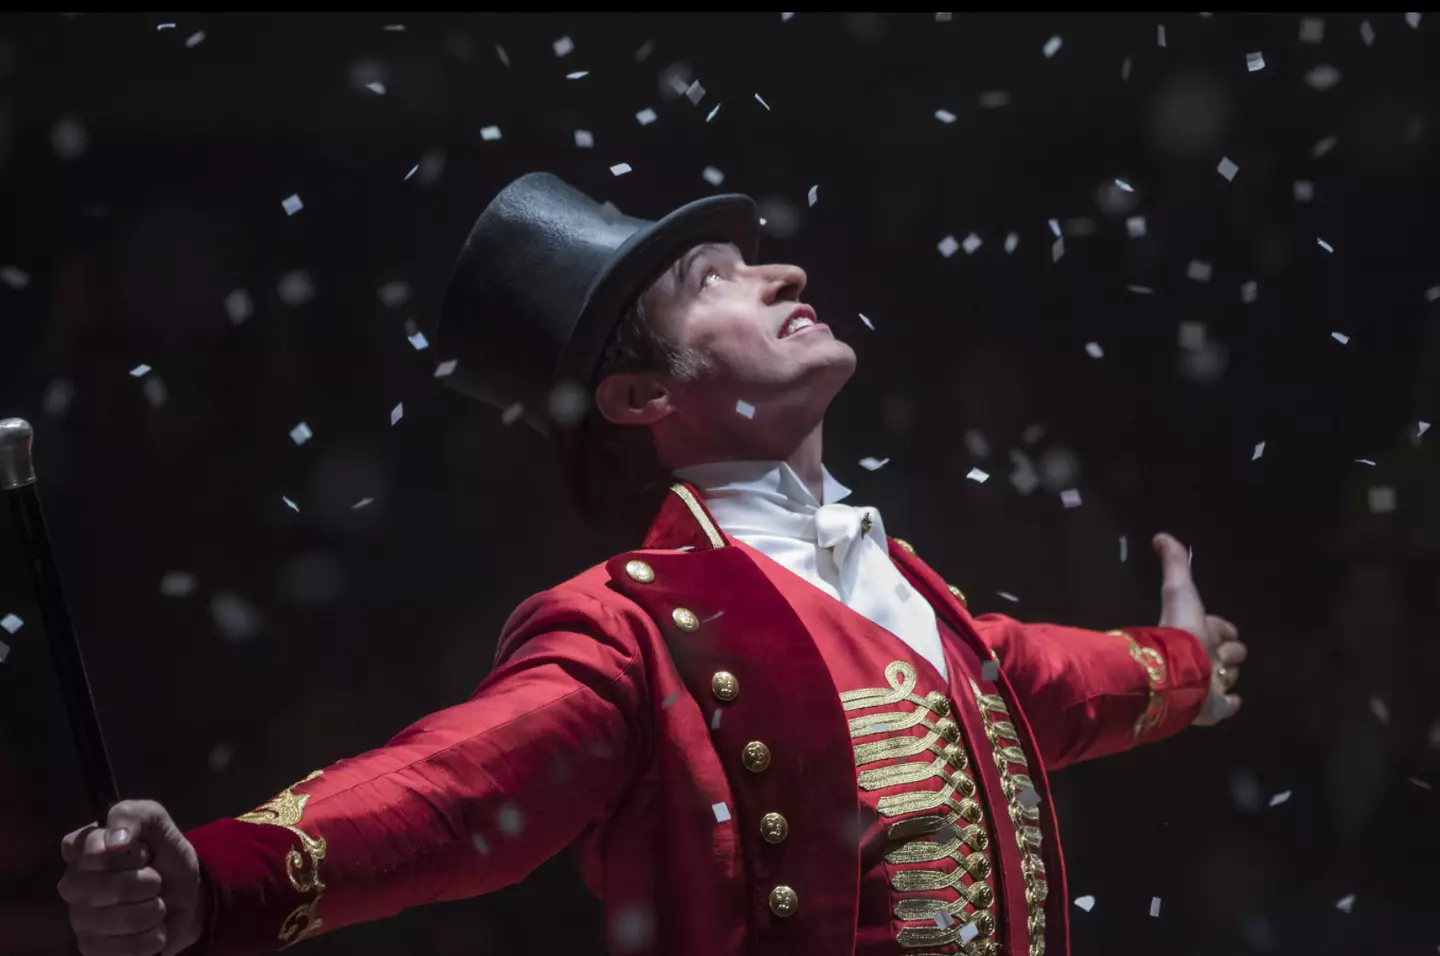 Hugh Jackman has revealed whether or not he'd be up for reprising his role as P T Barnum in a sequel to The Greatest Showman.